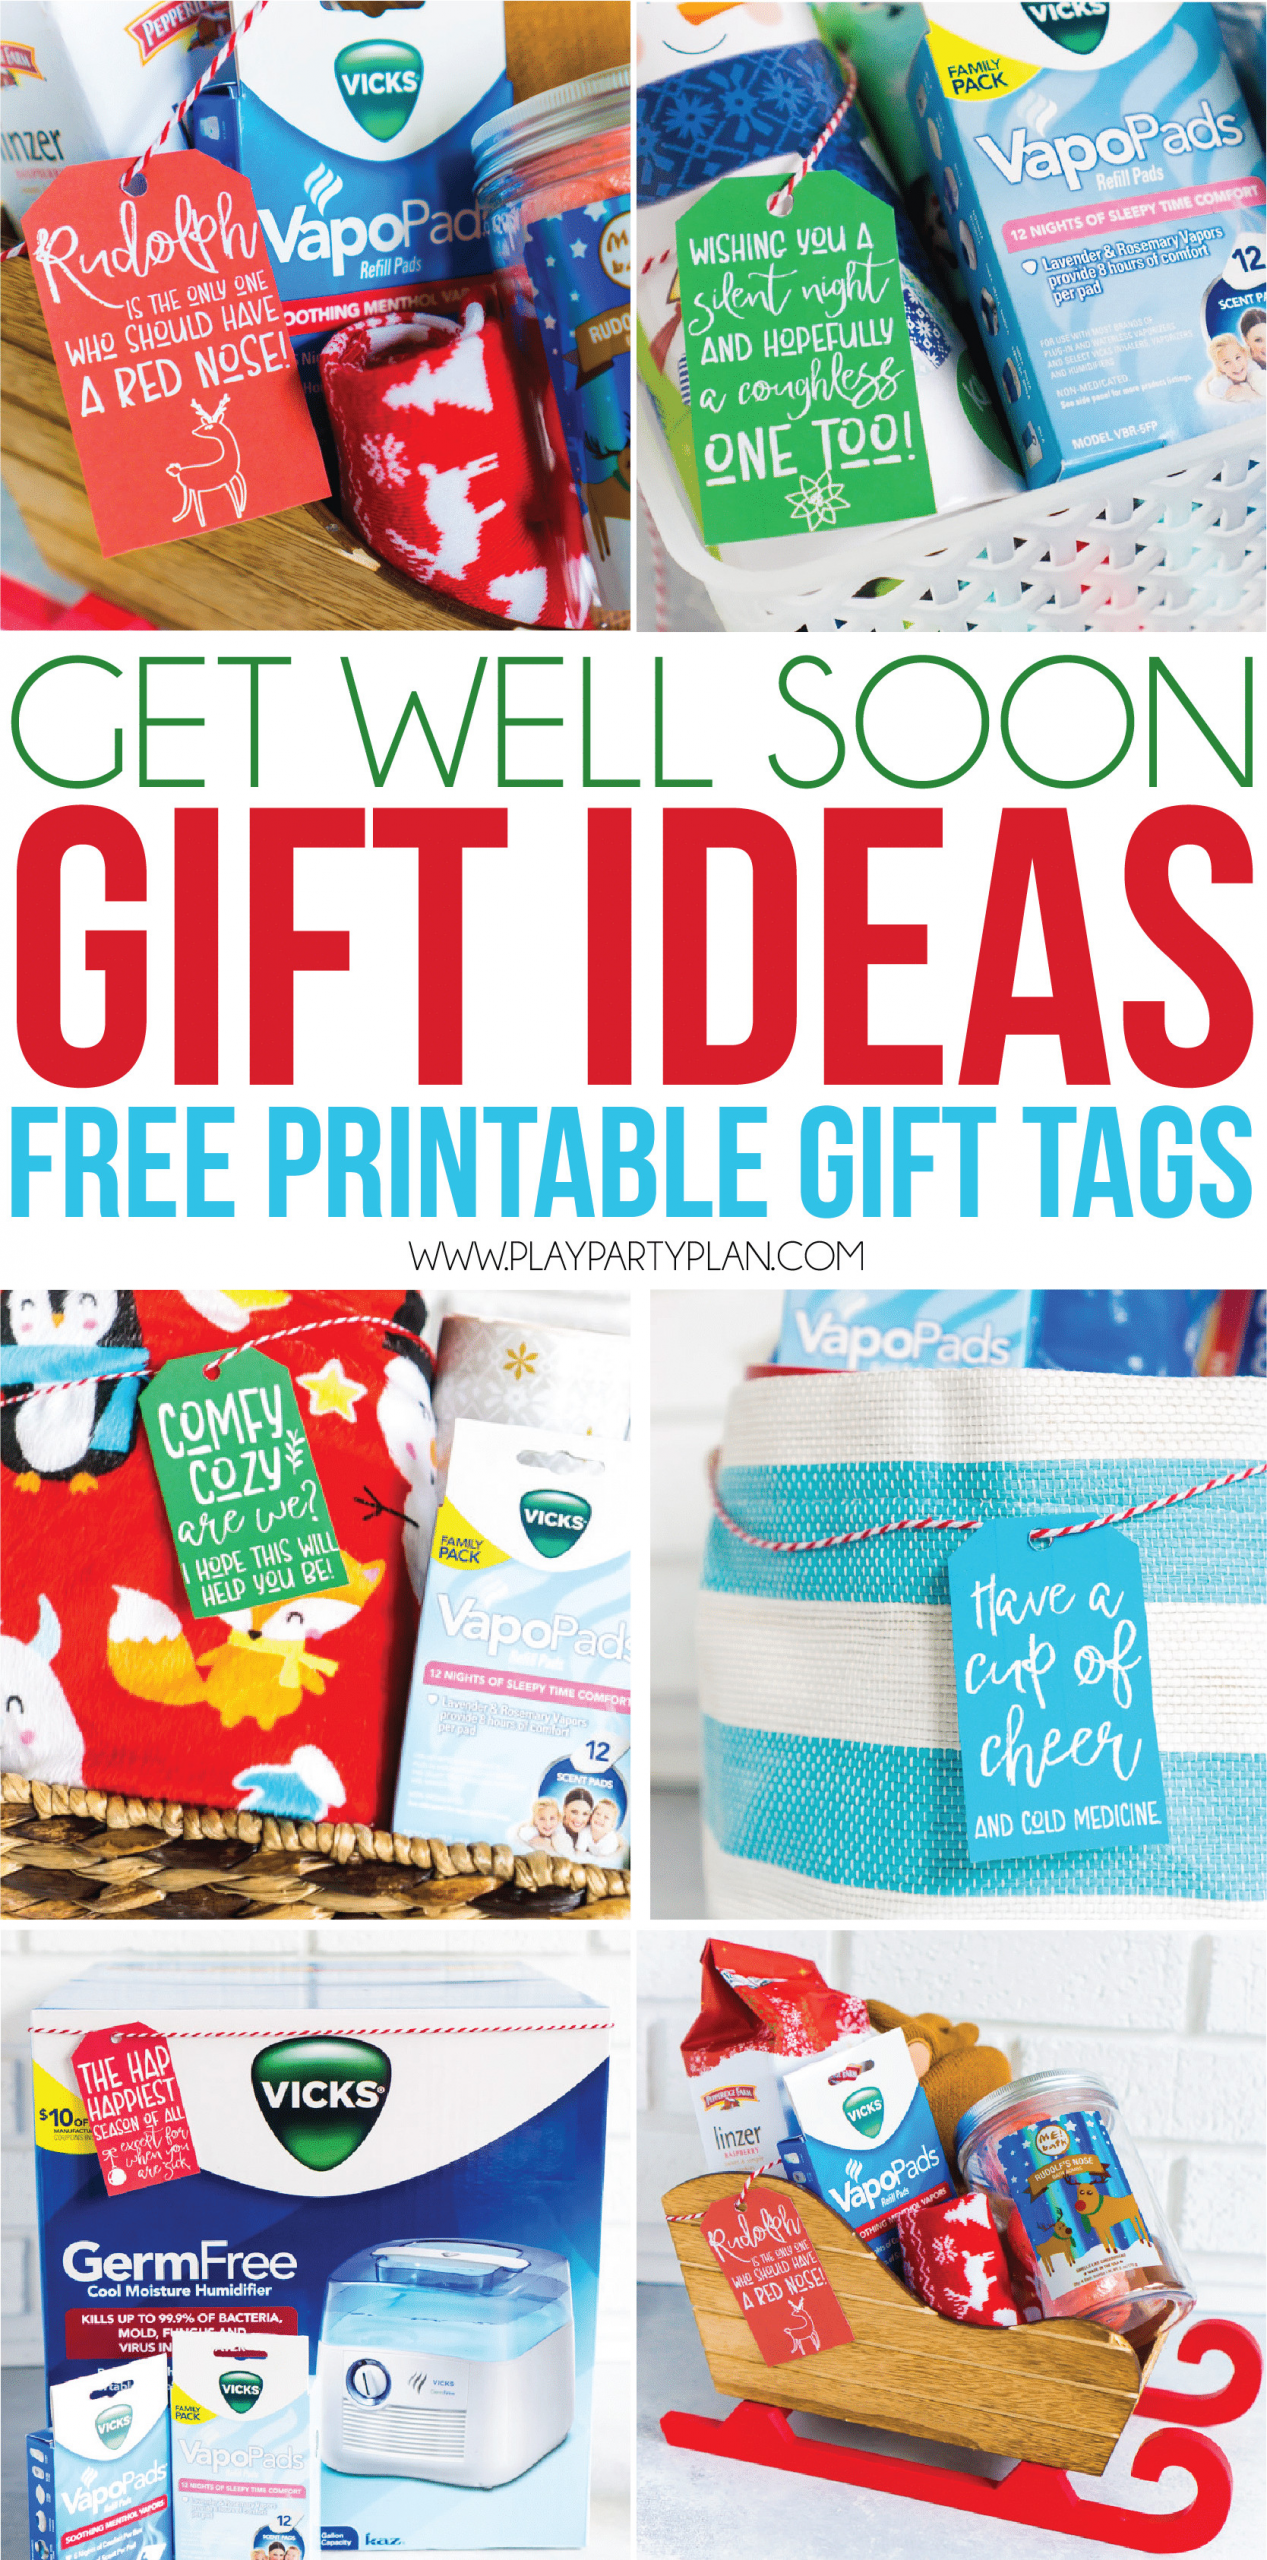 Get Well Soon Gifts For Kids
 Funny Get Well Soon Gifts & Free Printable Cards Play